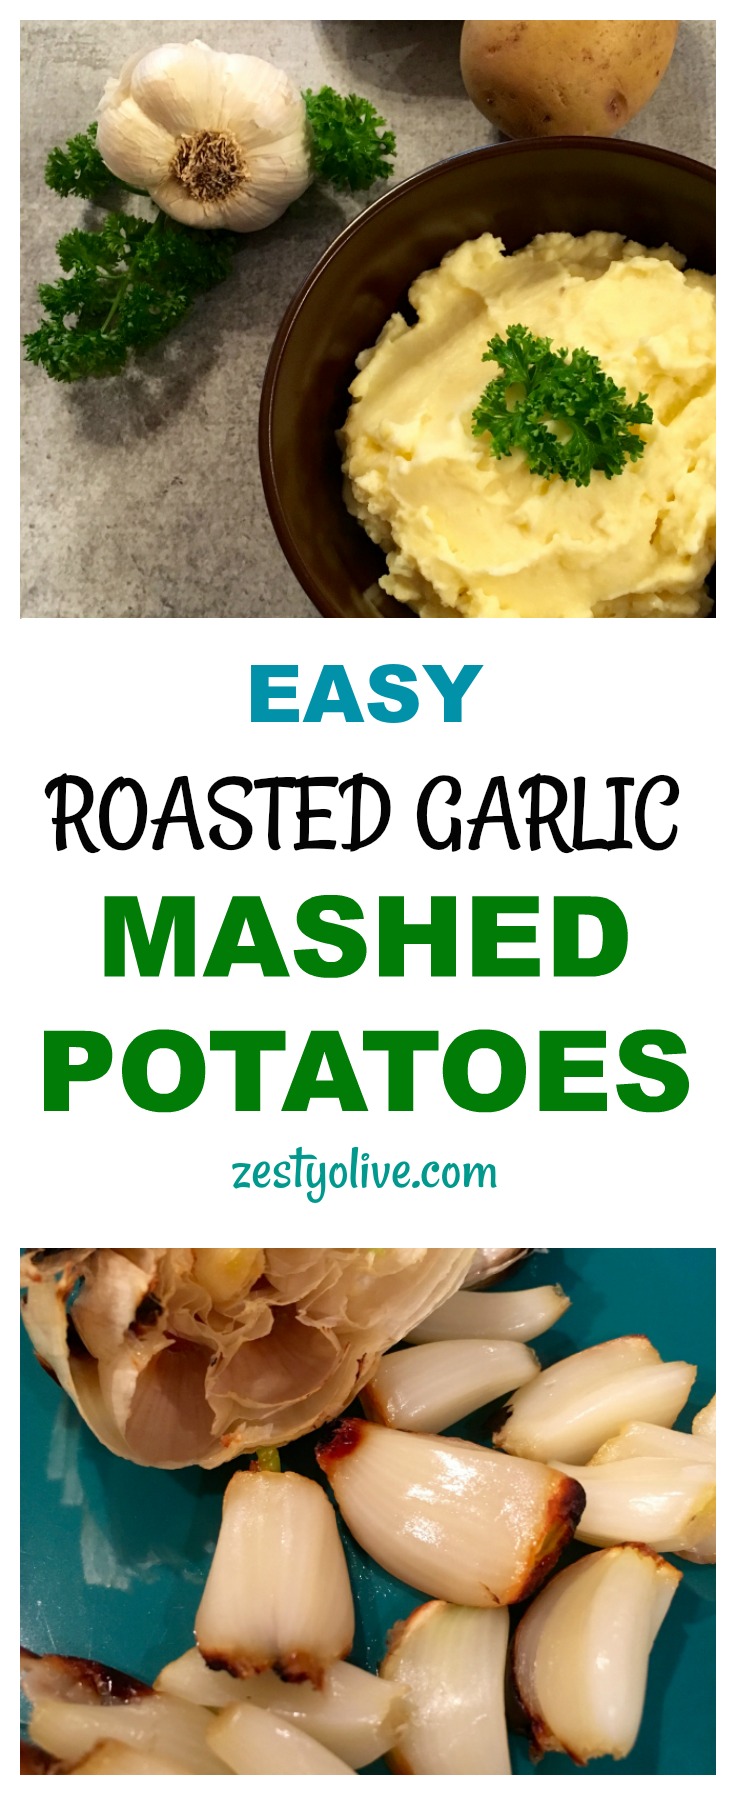 Here's an easy recipe for zesty Roasted Garlic Mashed Potatoes. Roasted garlic adds that delicious zing to the potatoes. You'll have this family favorite side dish ready in no time!